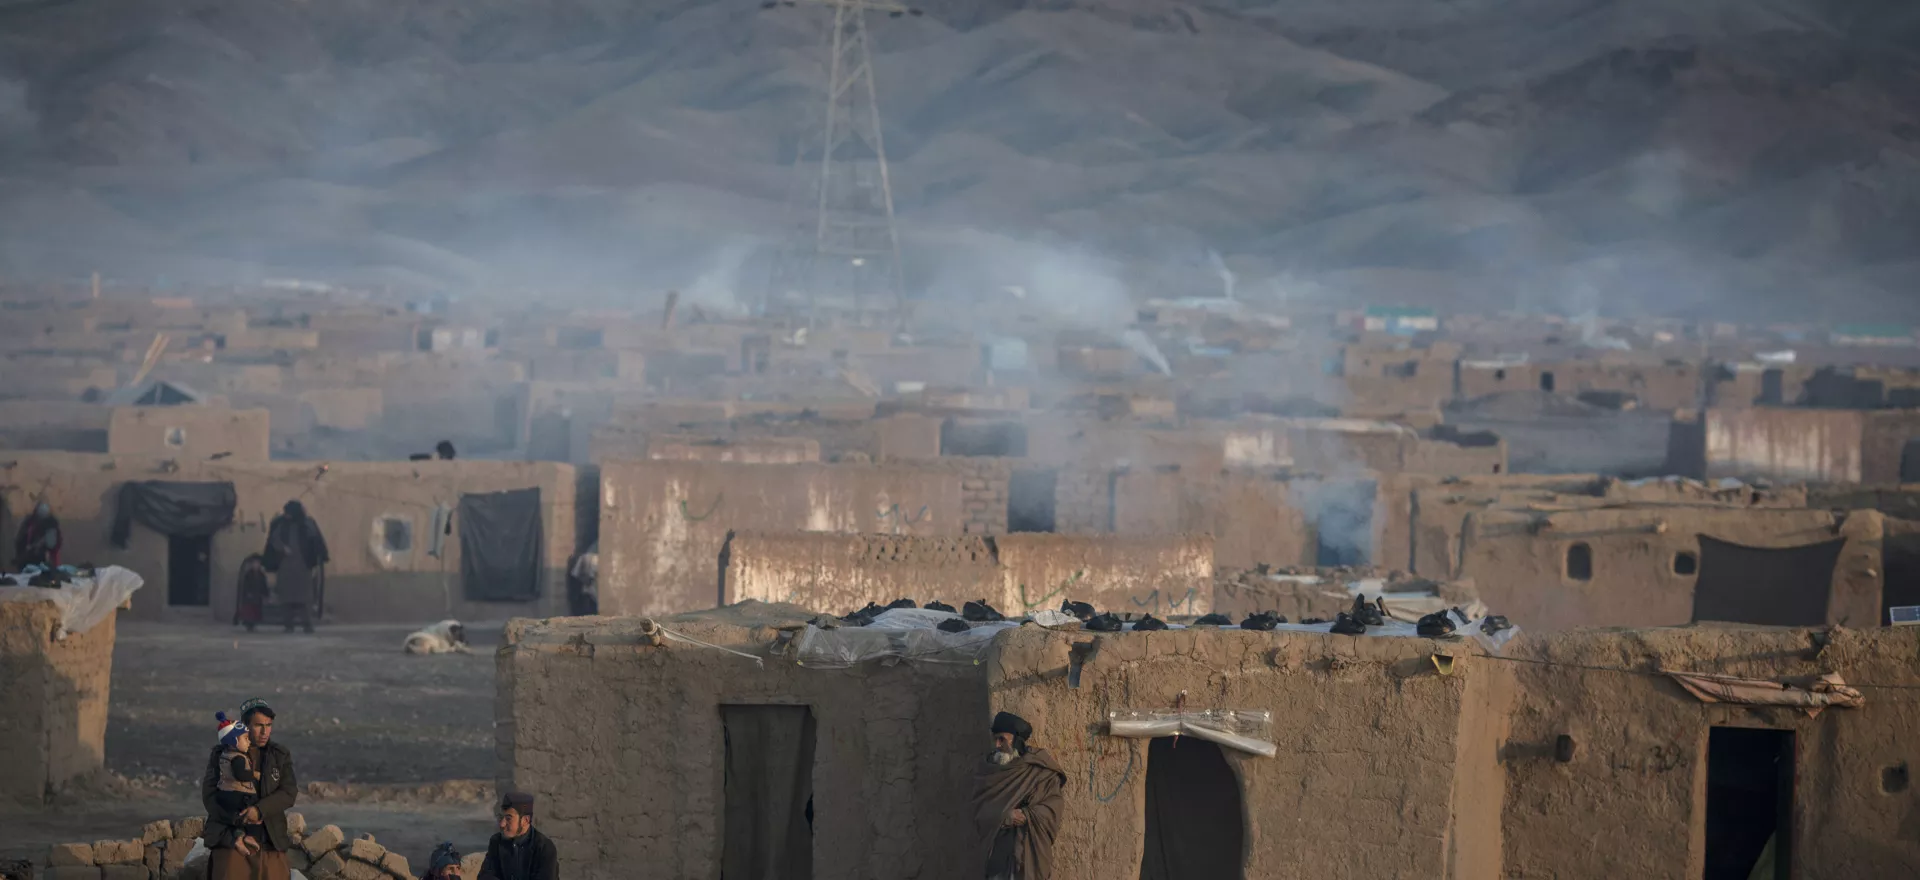 Smoke rises from the chimneys of hundreds of homes in an internally displaced camp on the outskirts of the western city of Herat, Afghanistan